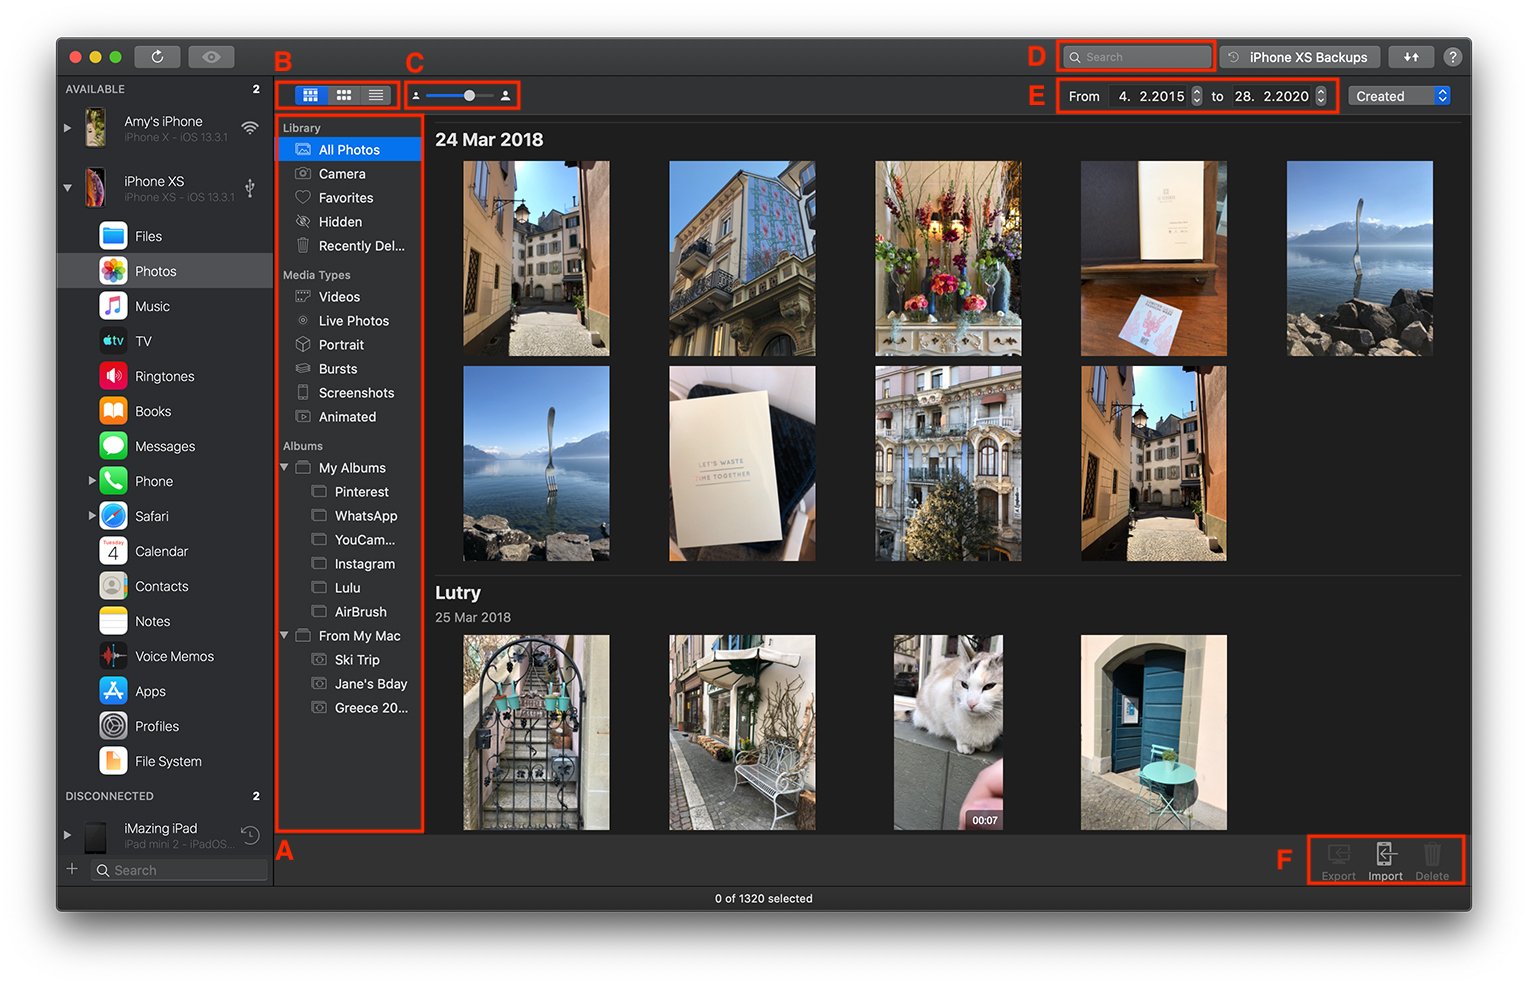 iMazing Photos Library View, With Highlighted and Numbered UI Components